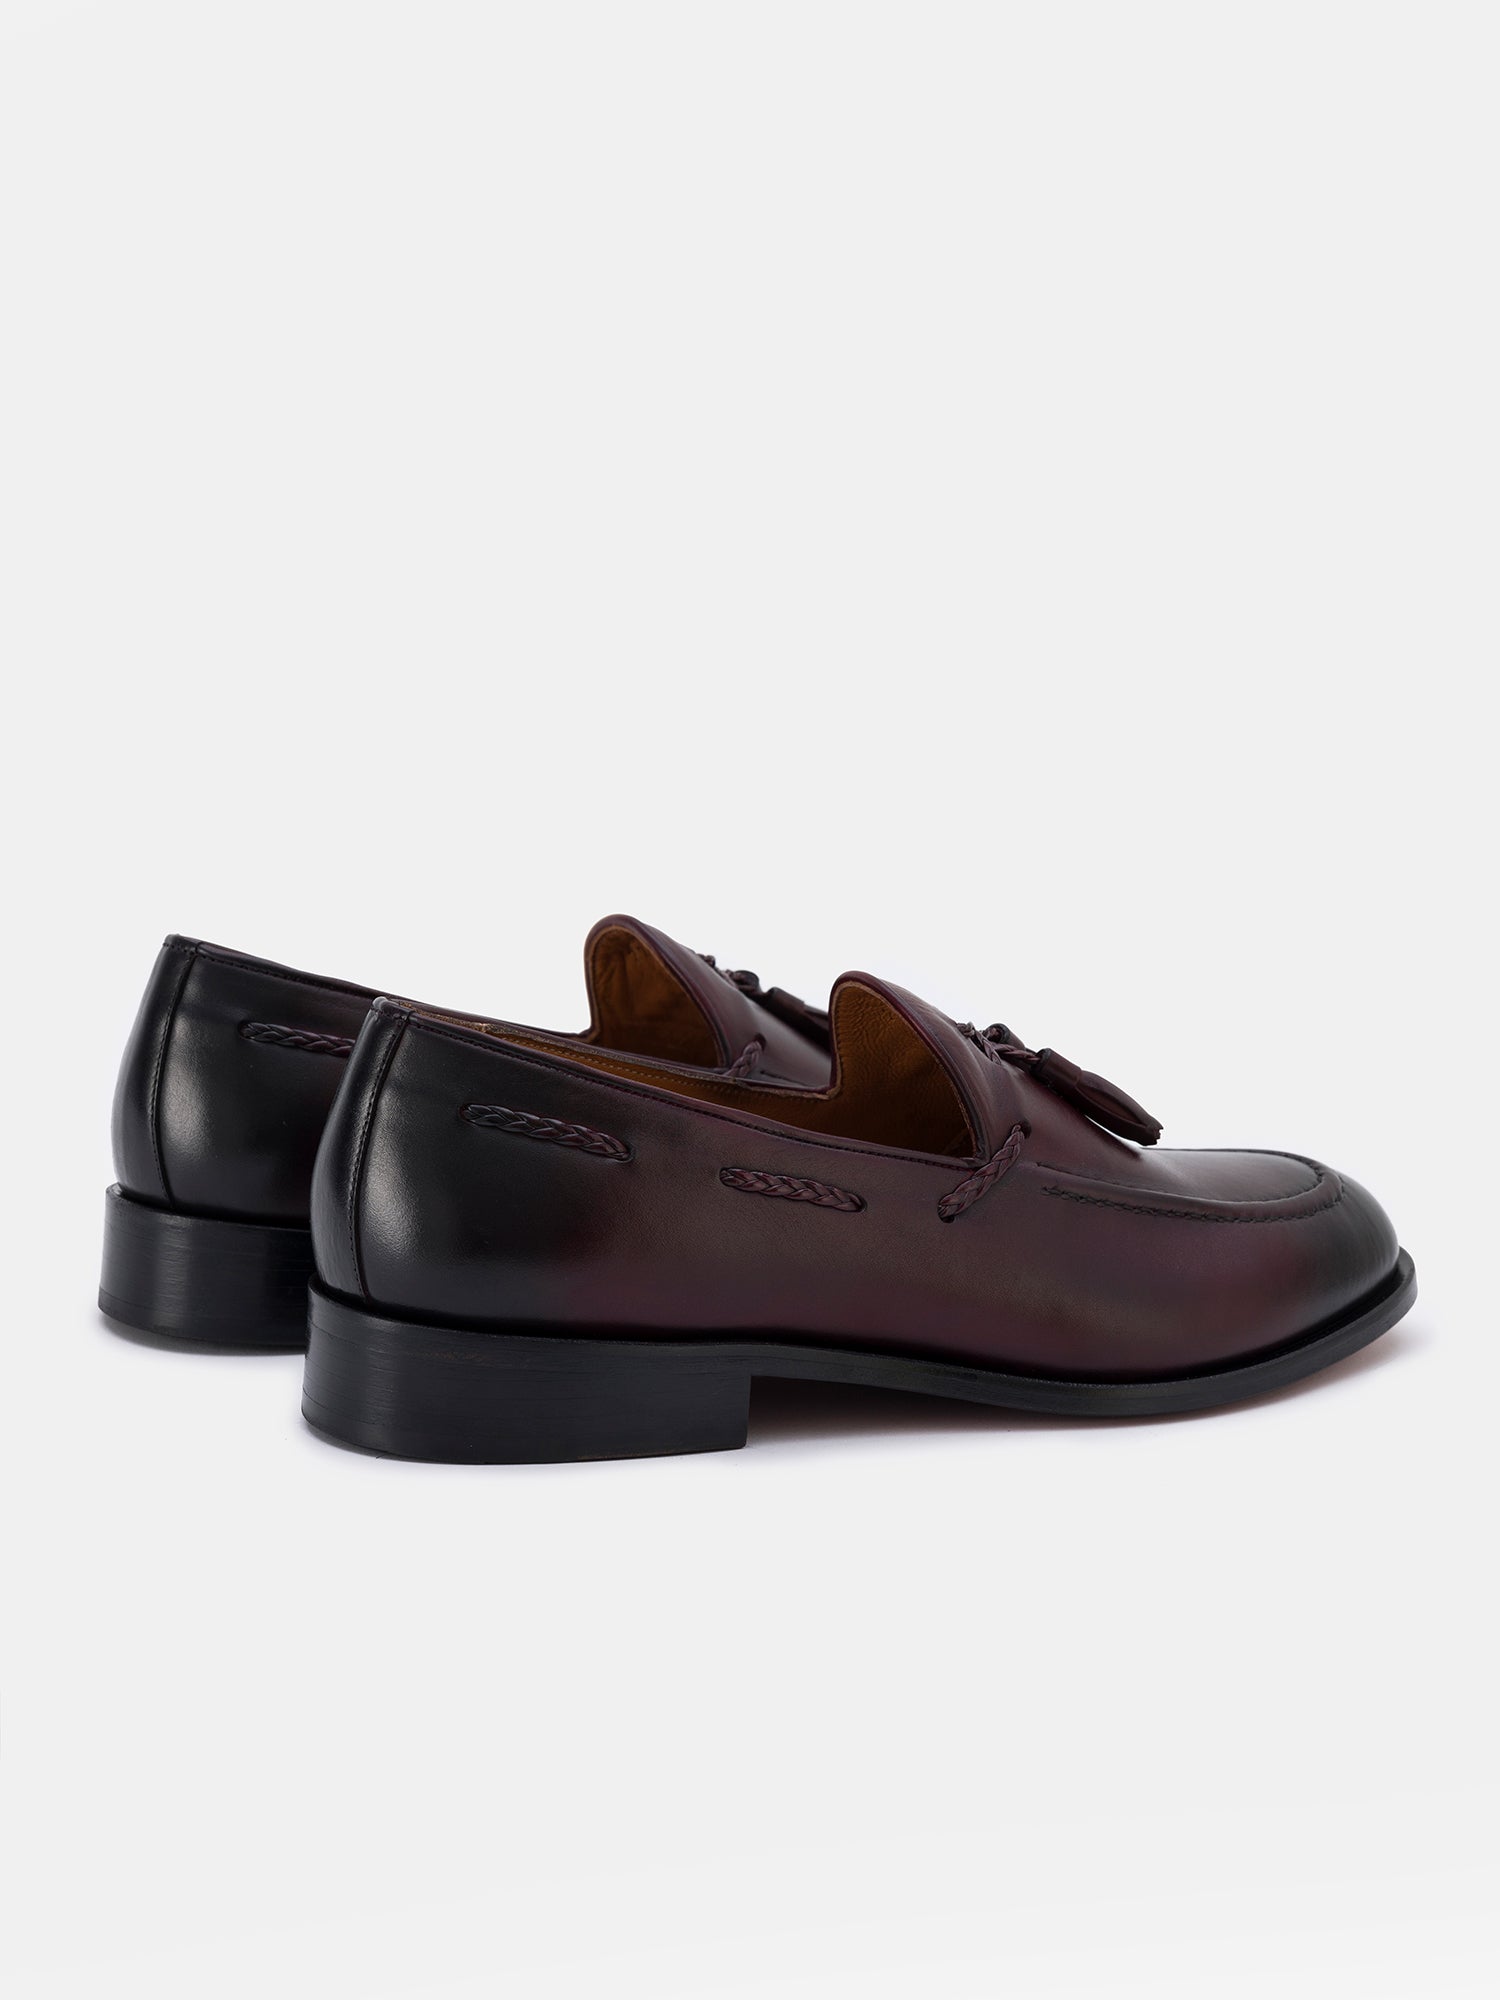 Brown Leather Tasselled Loafers